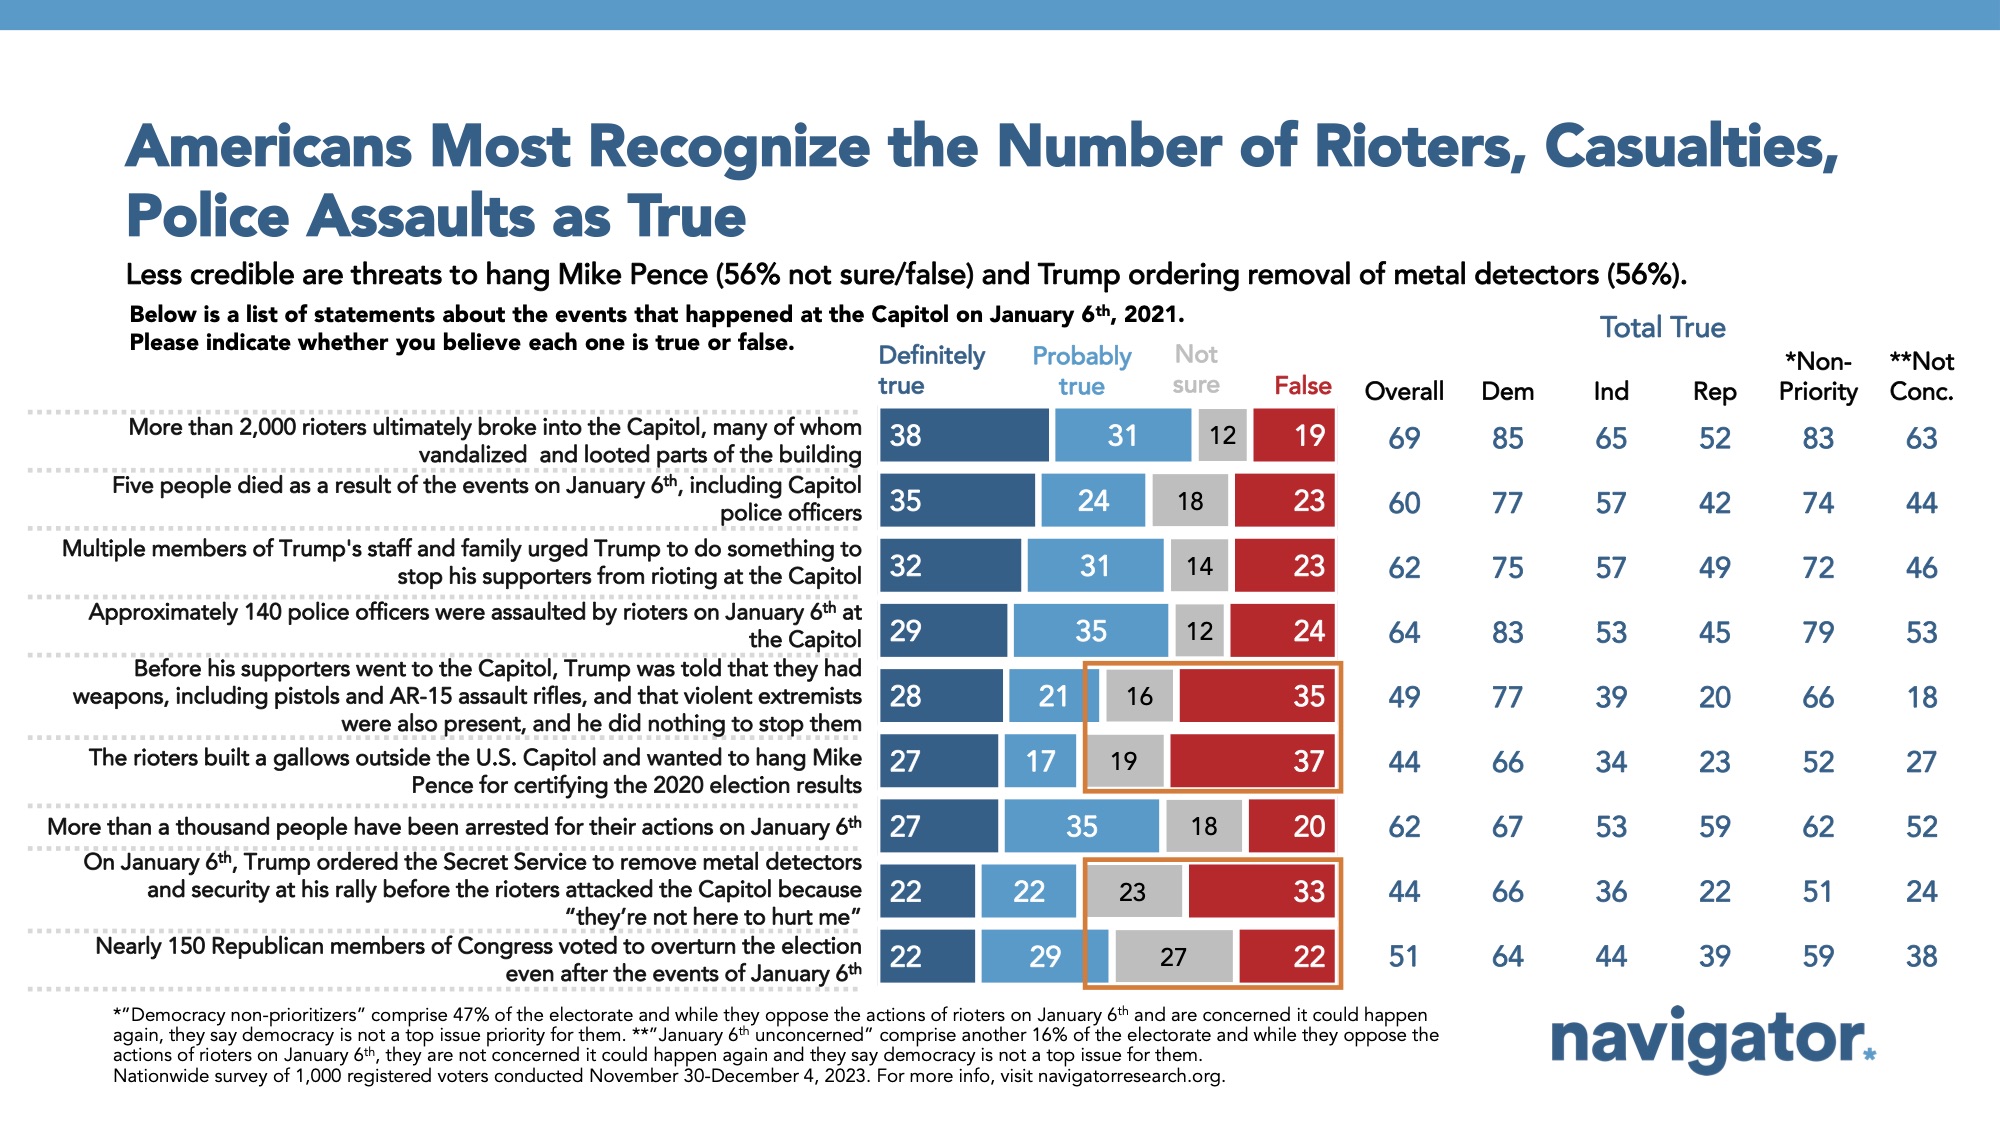 Bar graph of polling data from Navigator Research. Title: Americans Most Recognize the Number of Rioters, Casualties, Police Assaults as True